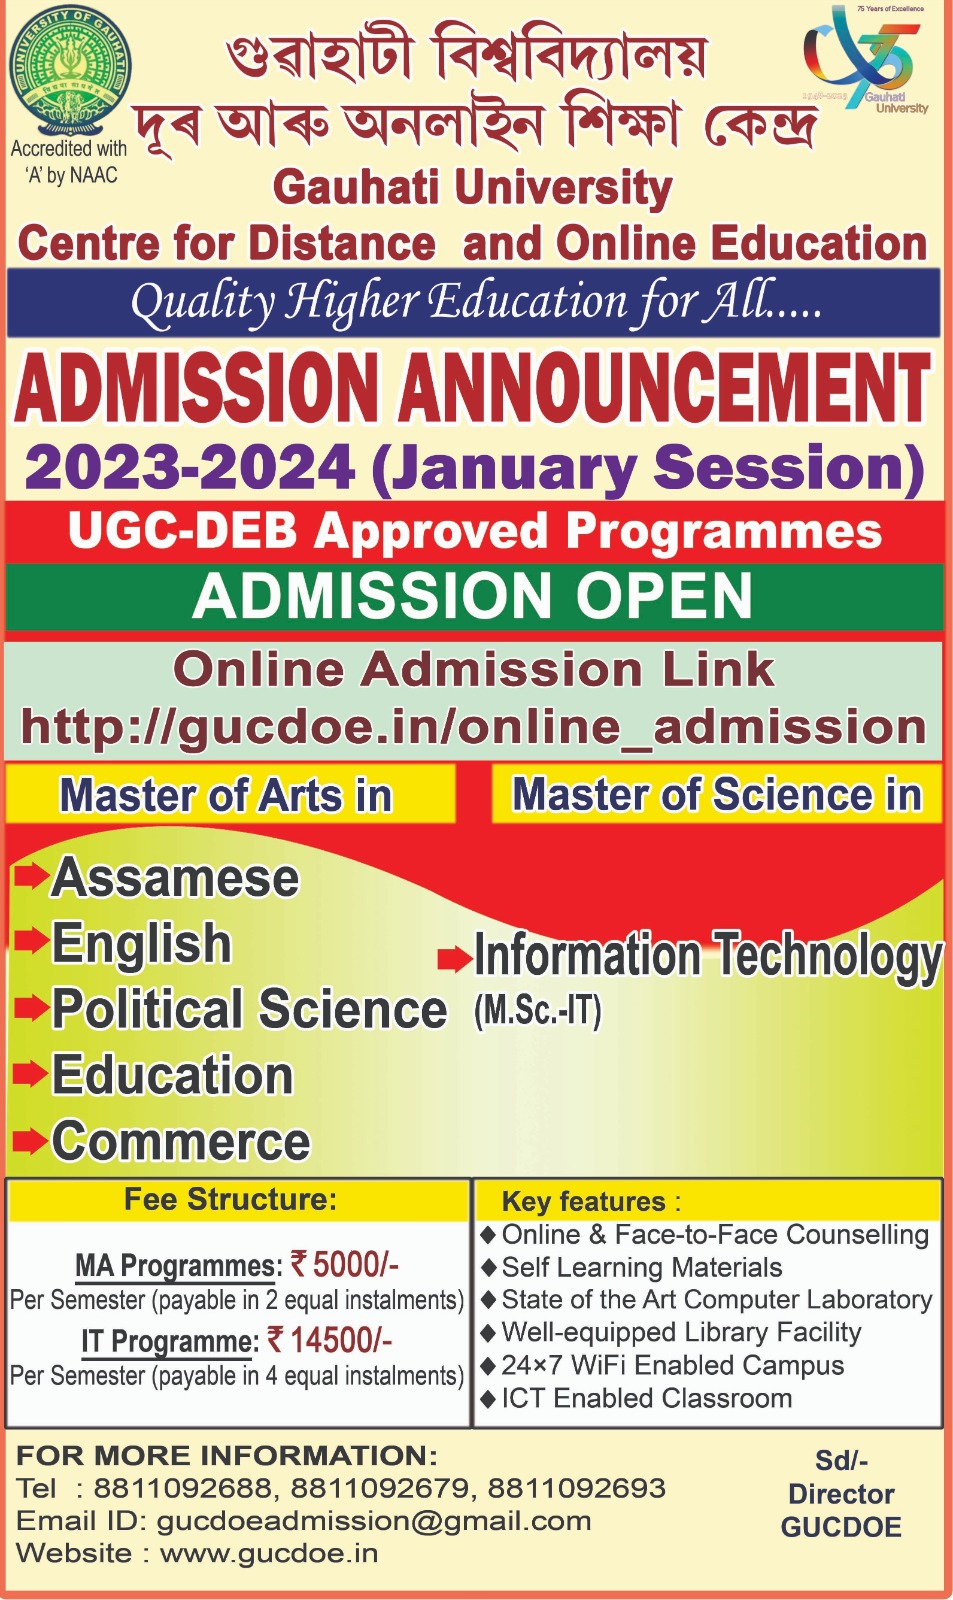 Admission Going ON